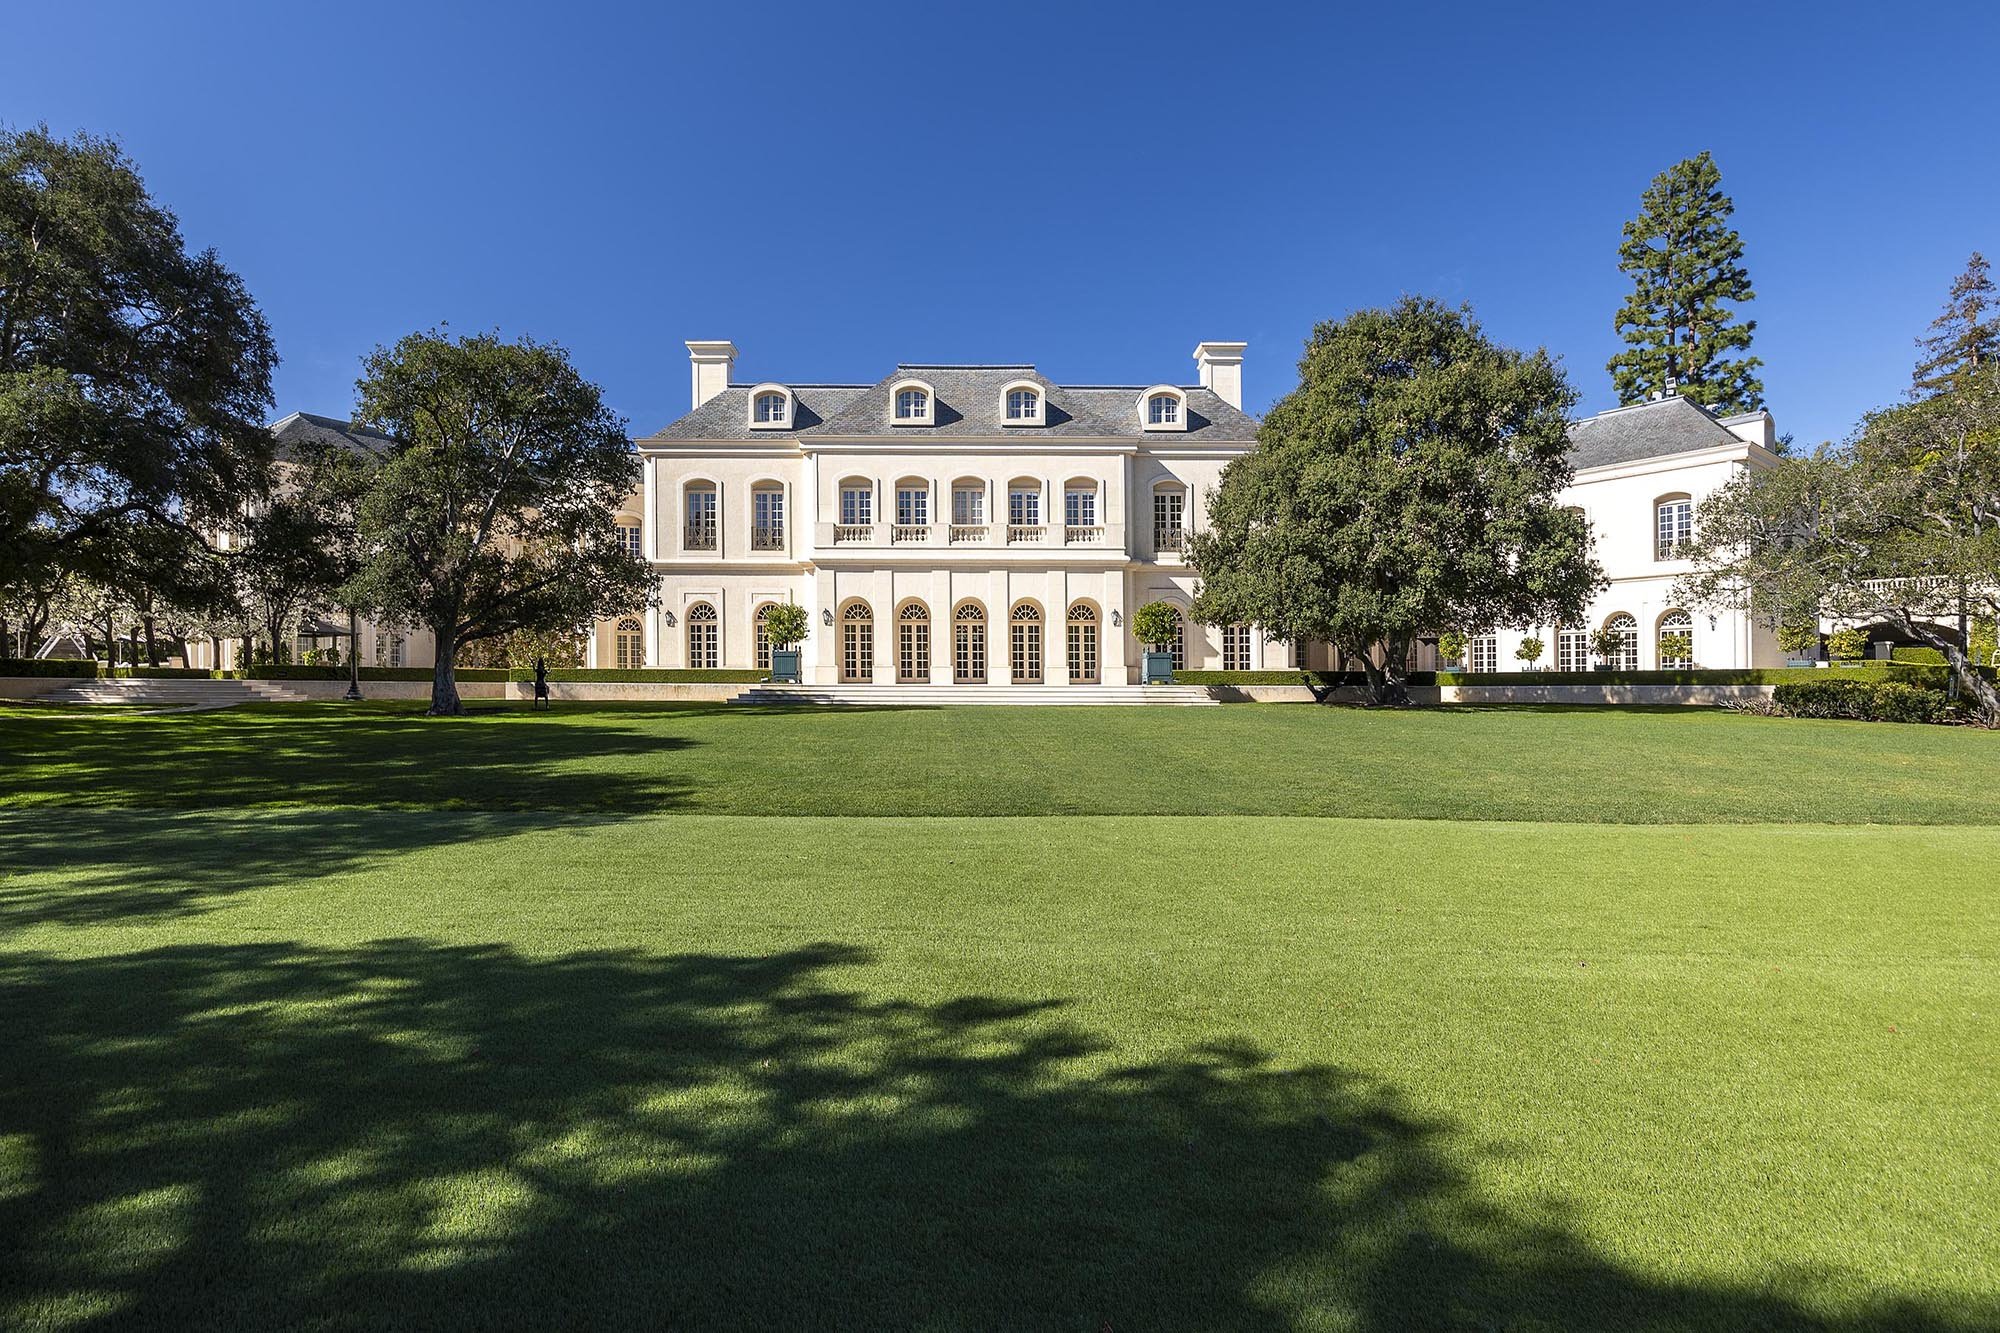 Francis York The 'Spelling Manor' is Back on the Market for $165M 3.jpg